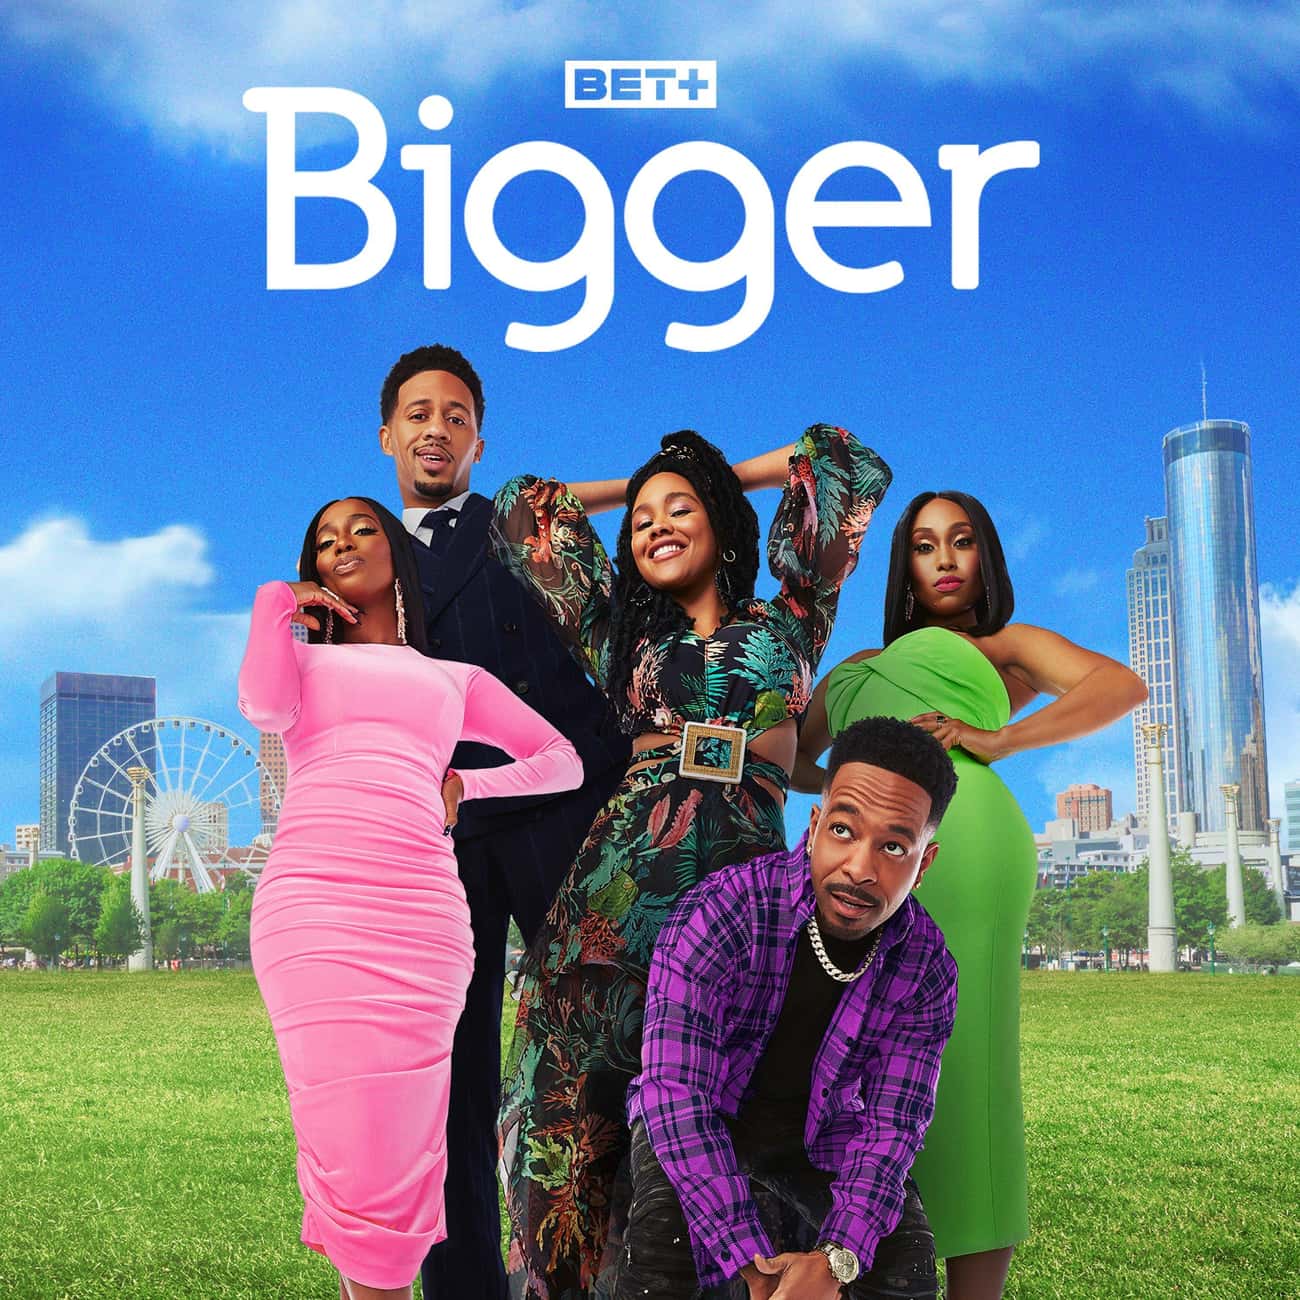 All The Best Original BET+ Shows You Can Watch Now